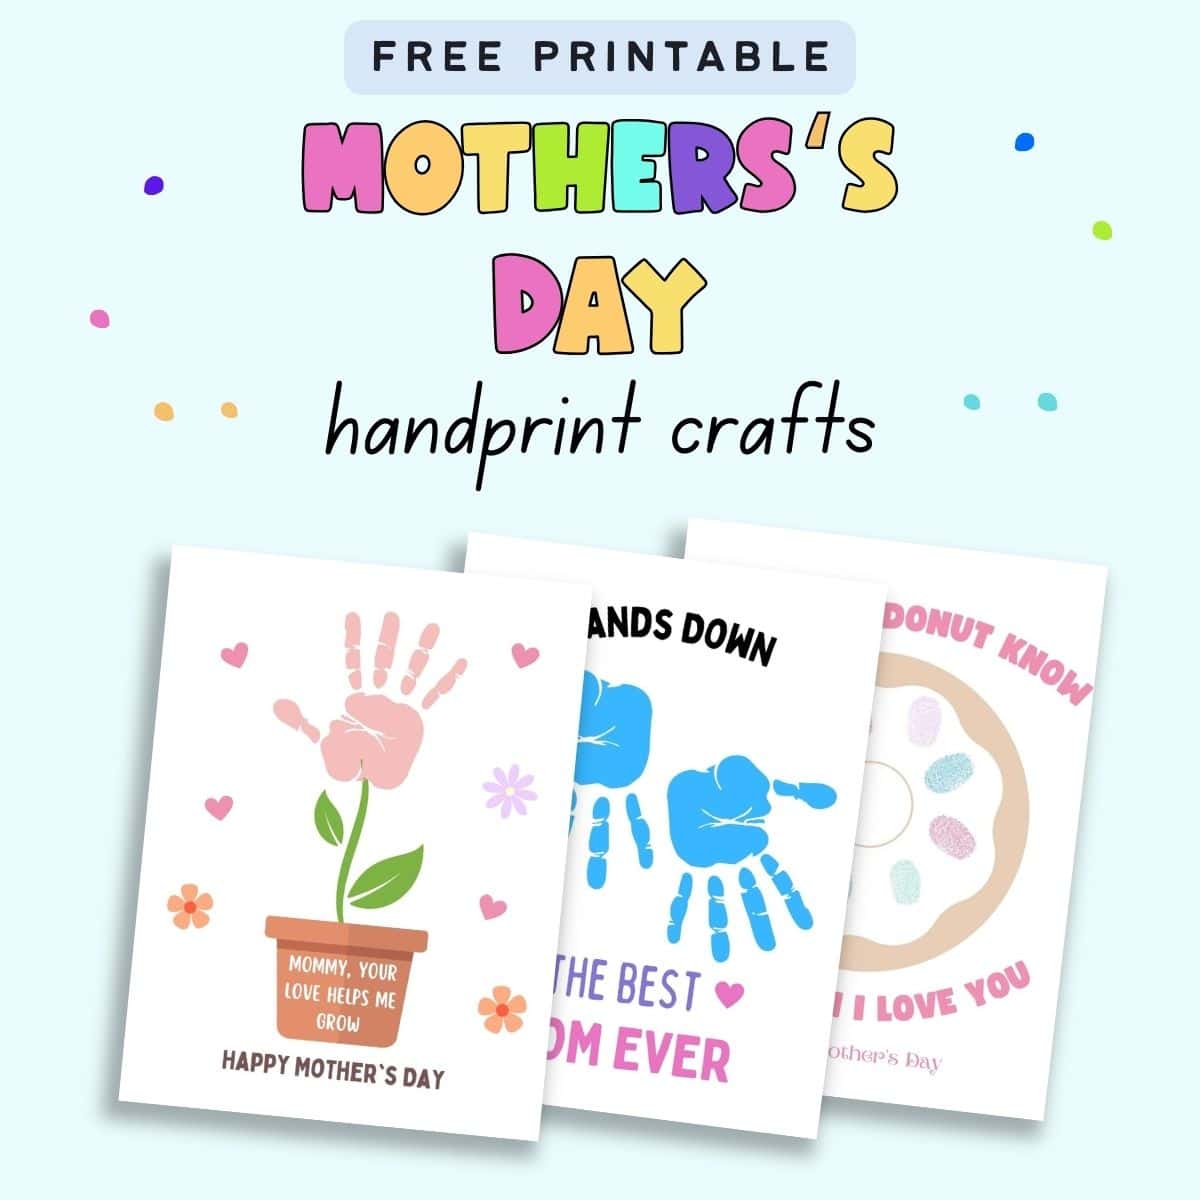 Text "Free printable Mother's Day handprint crafts" with a preview of there printable handprint crafts